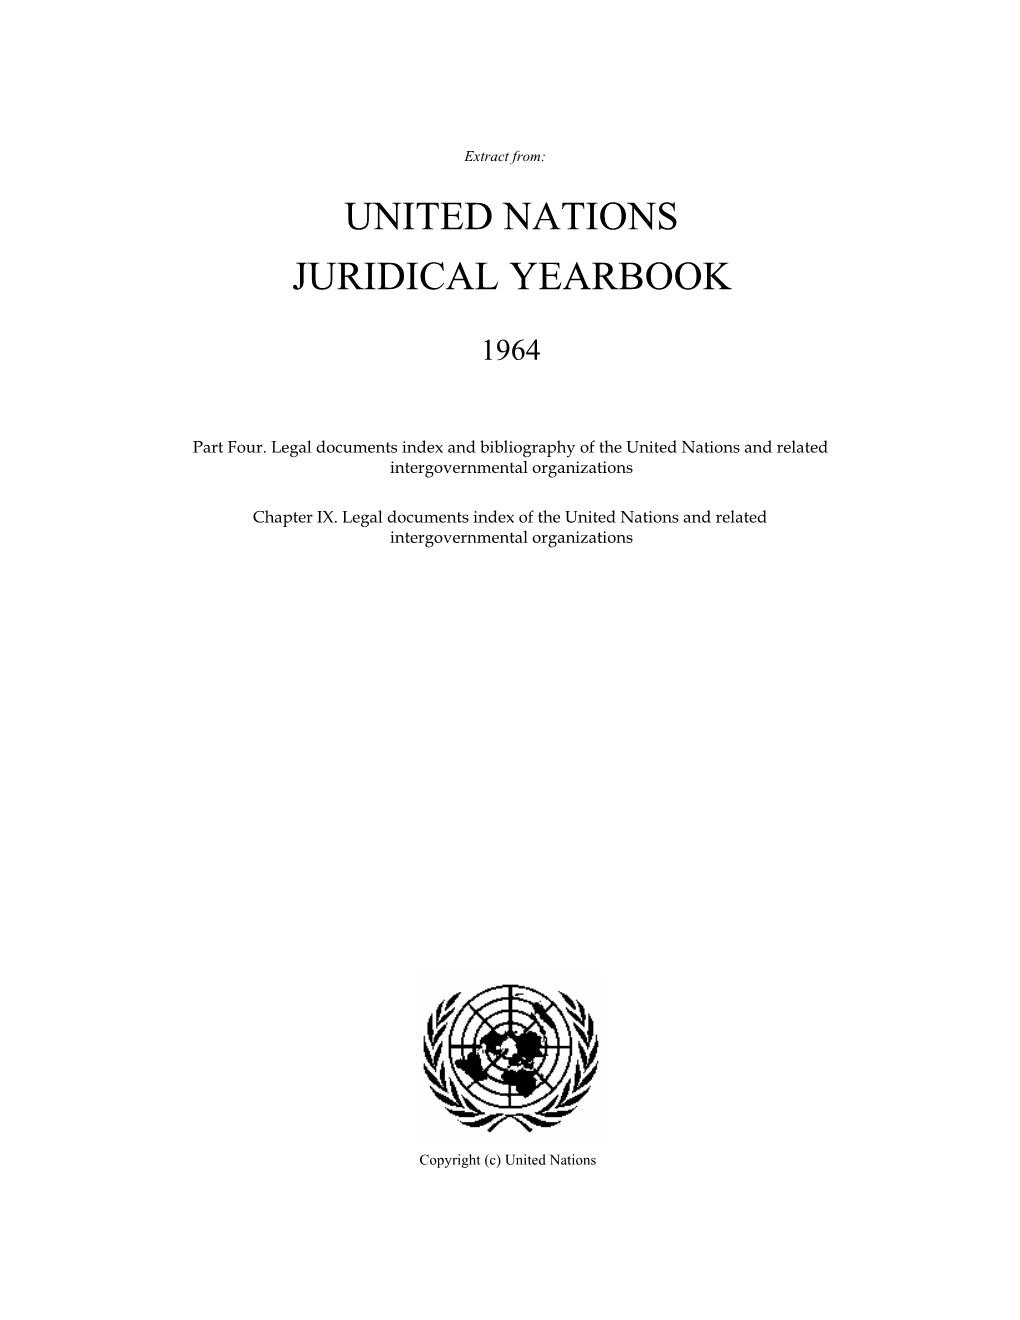 United Nations Juridical Yearbook, 1964